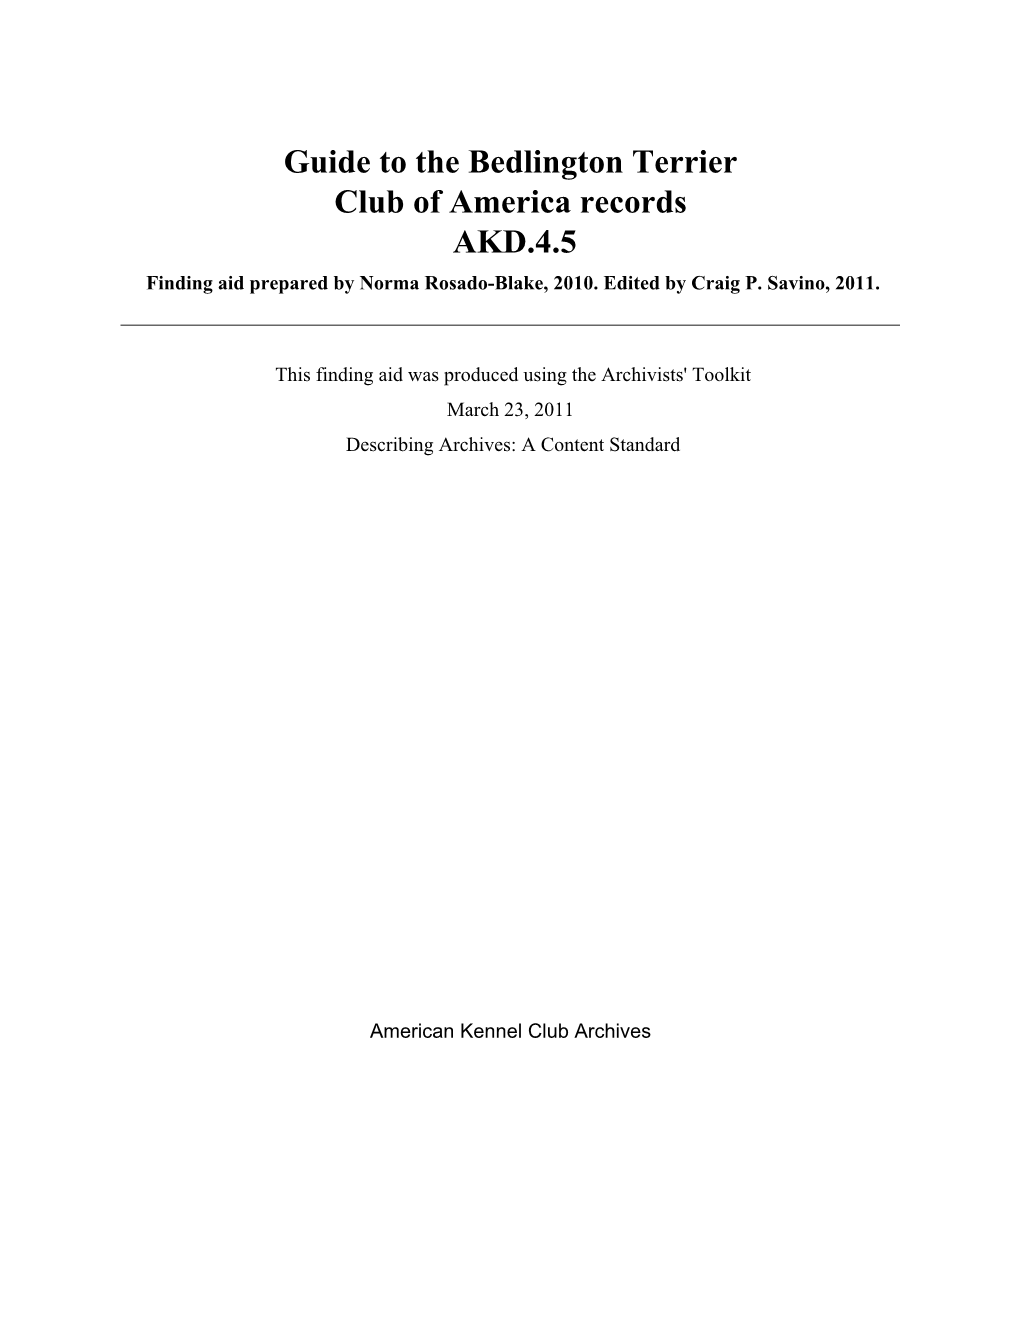 Guide to the Bedlington Terrier Club of America Records AKD.4.5 Finding Aid Prepared by Norma Rosado-Blake, 2010